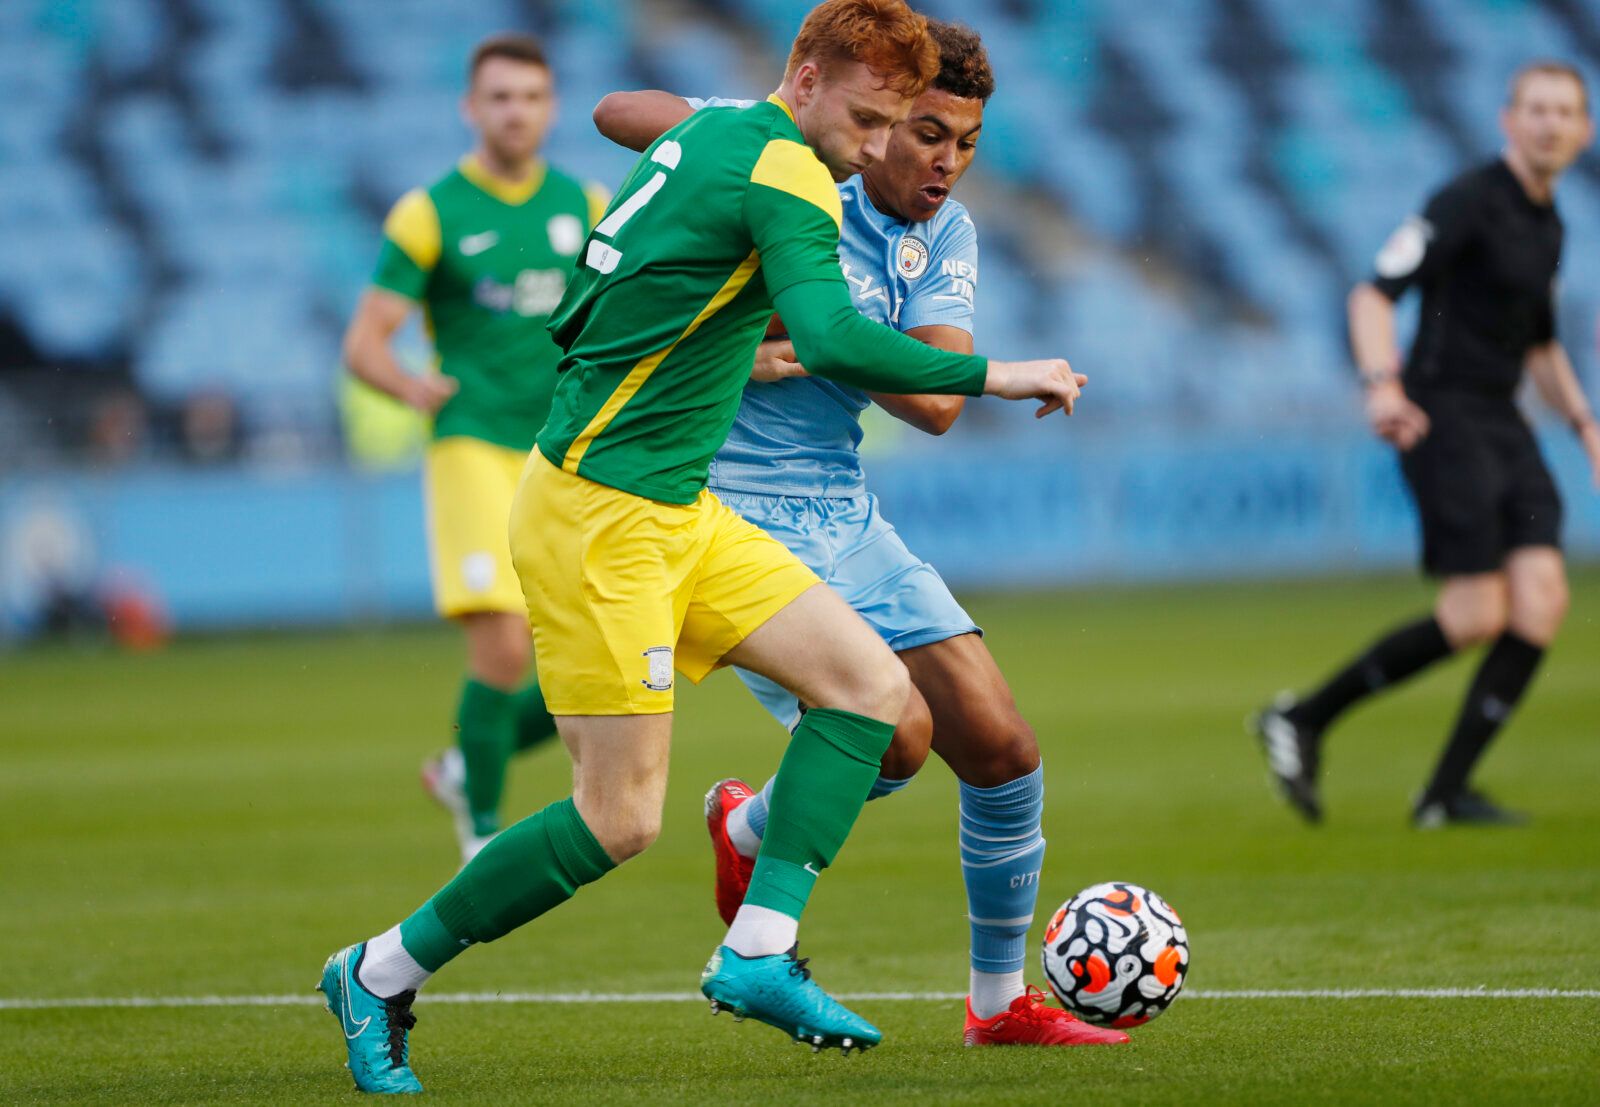 Soccer Football - Pre Season Friendly - Manchester City v Preston North End - Manchester City Academy Stadium, Manchester, Britain - July 27, 2021  Manchester City's Morgan Rogers in action with Preston North End's Sepp Van Den Berg Action Images via Reuters/Lee Smith